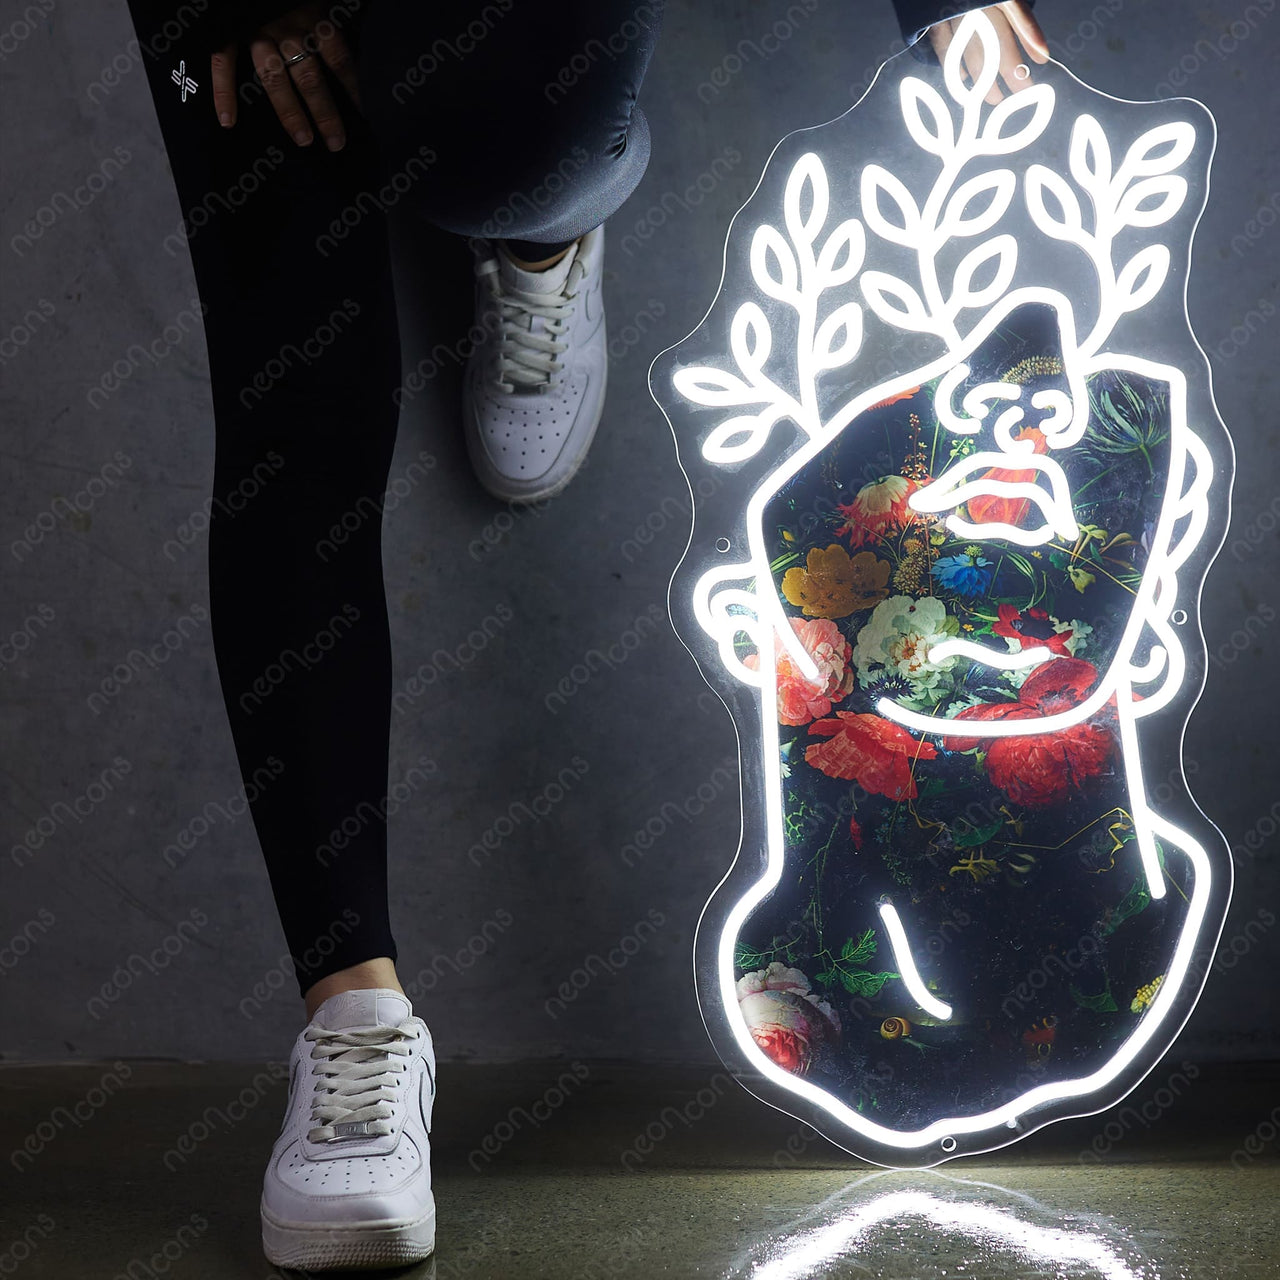 "Growth" LED Neon x Acrylic Artwork by Neon Icons